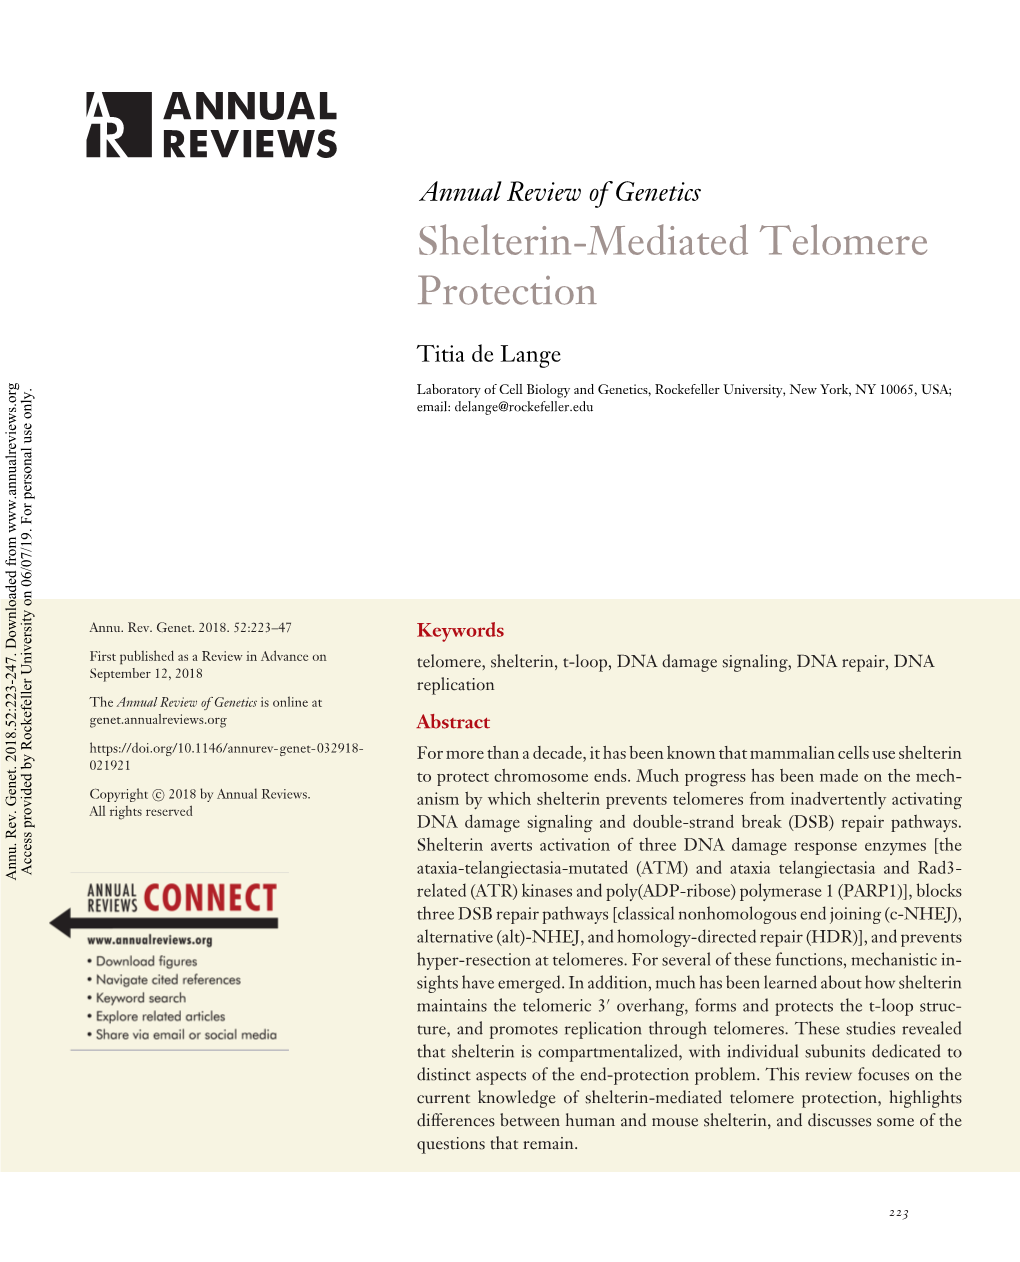 Shelterin-Mediated Telomere Protection